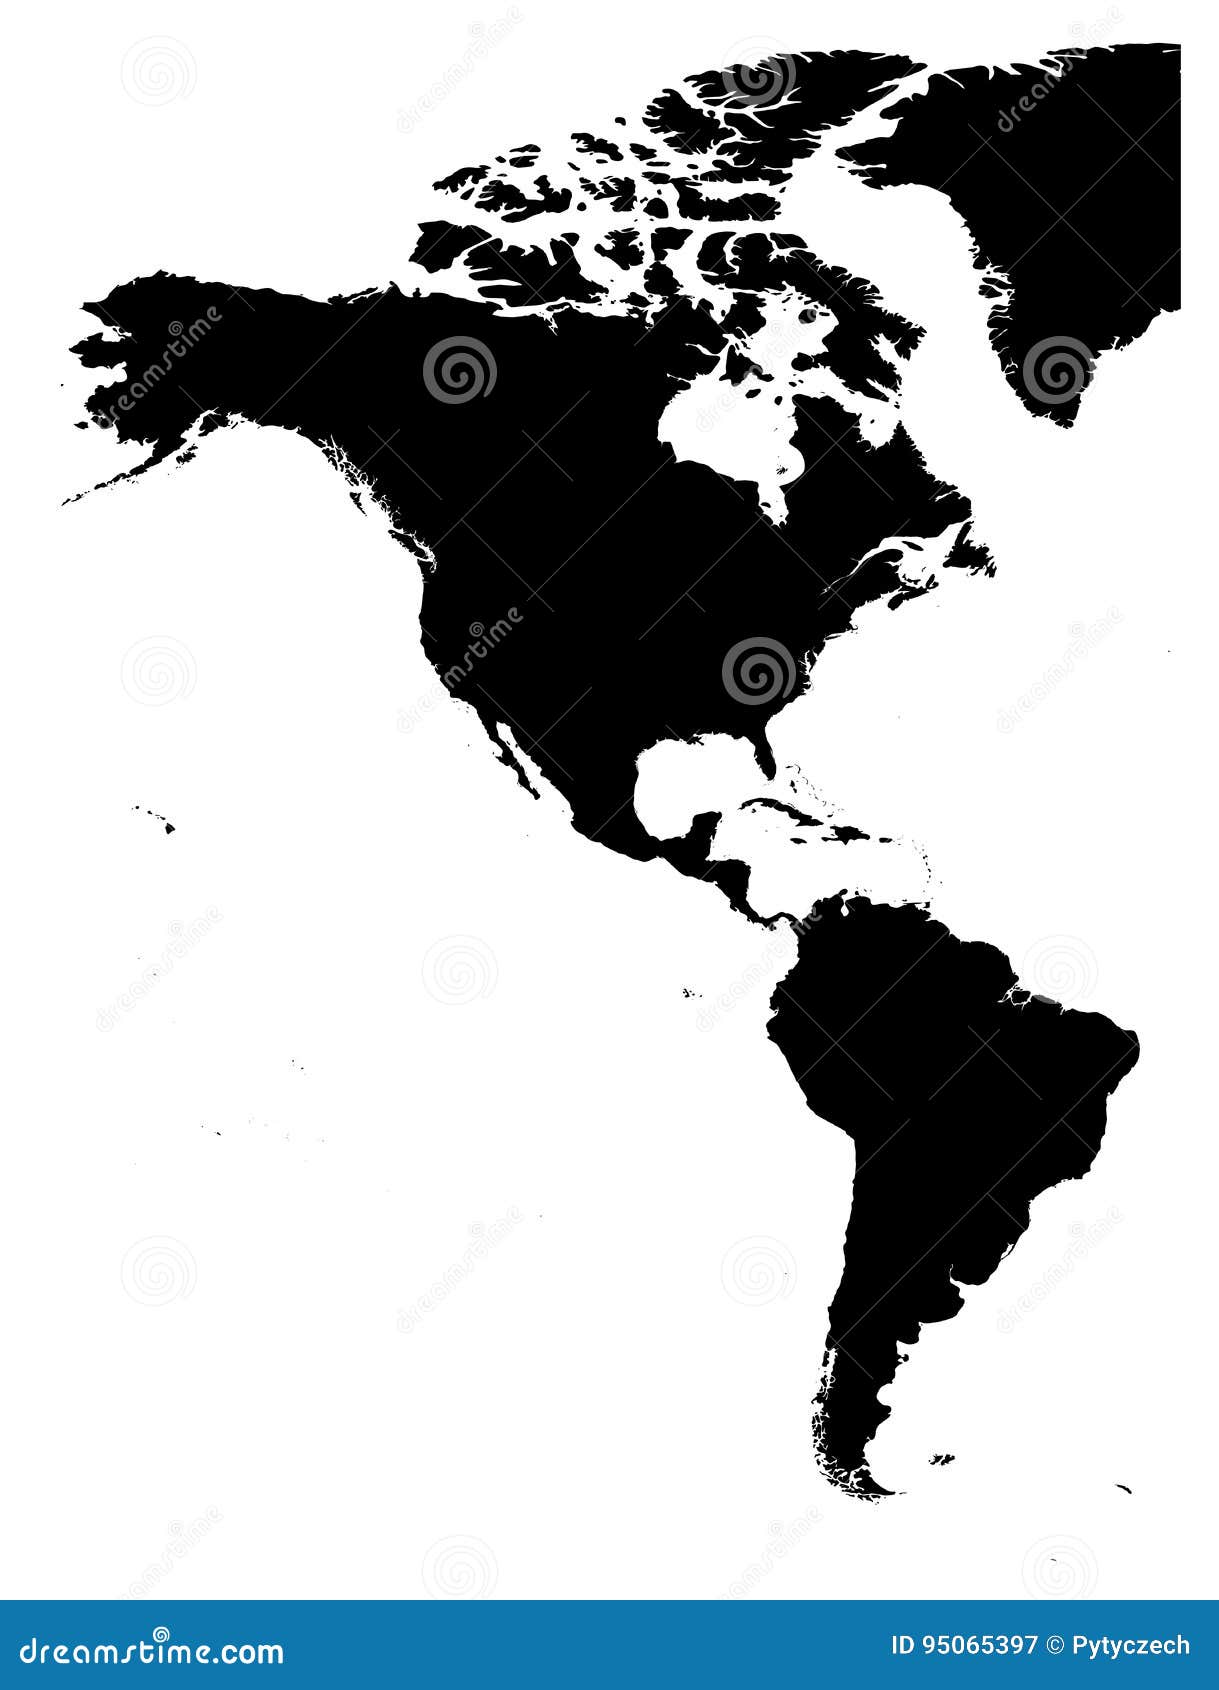 land silhouette map of americas, north and south america, on white background.  